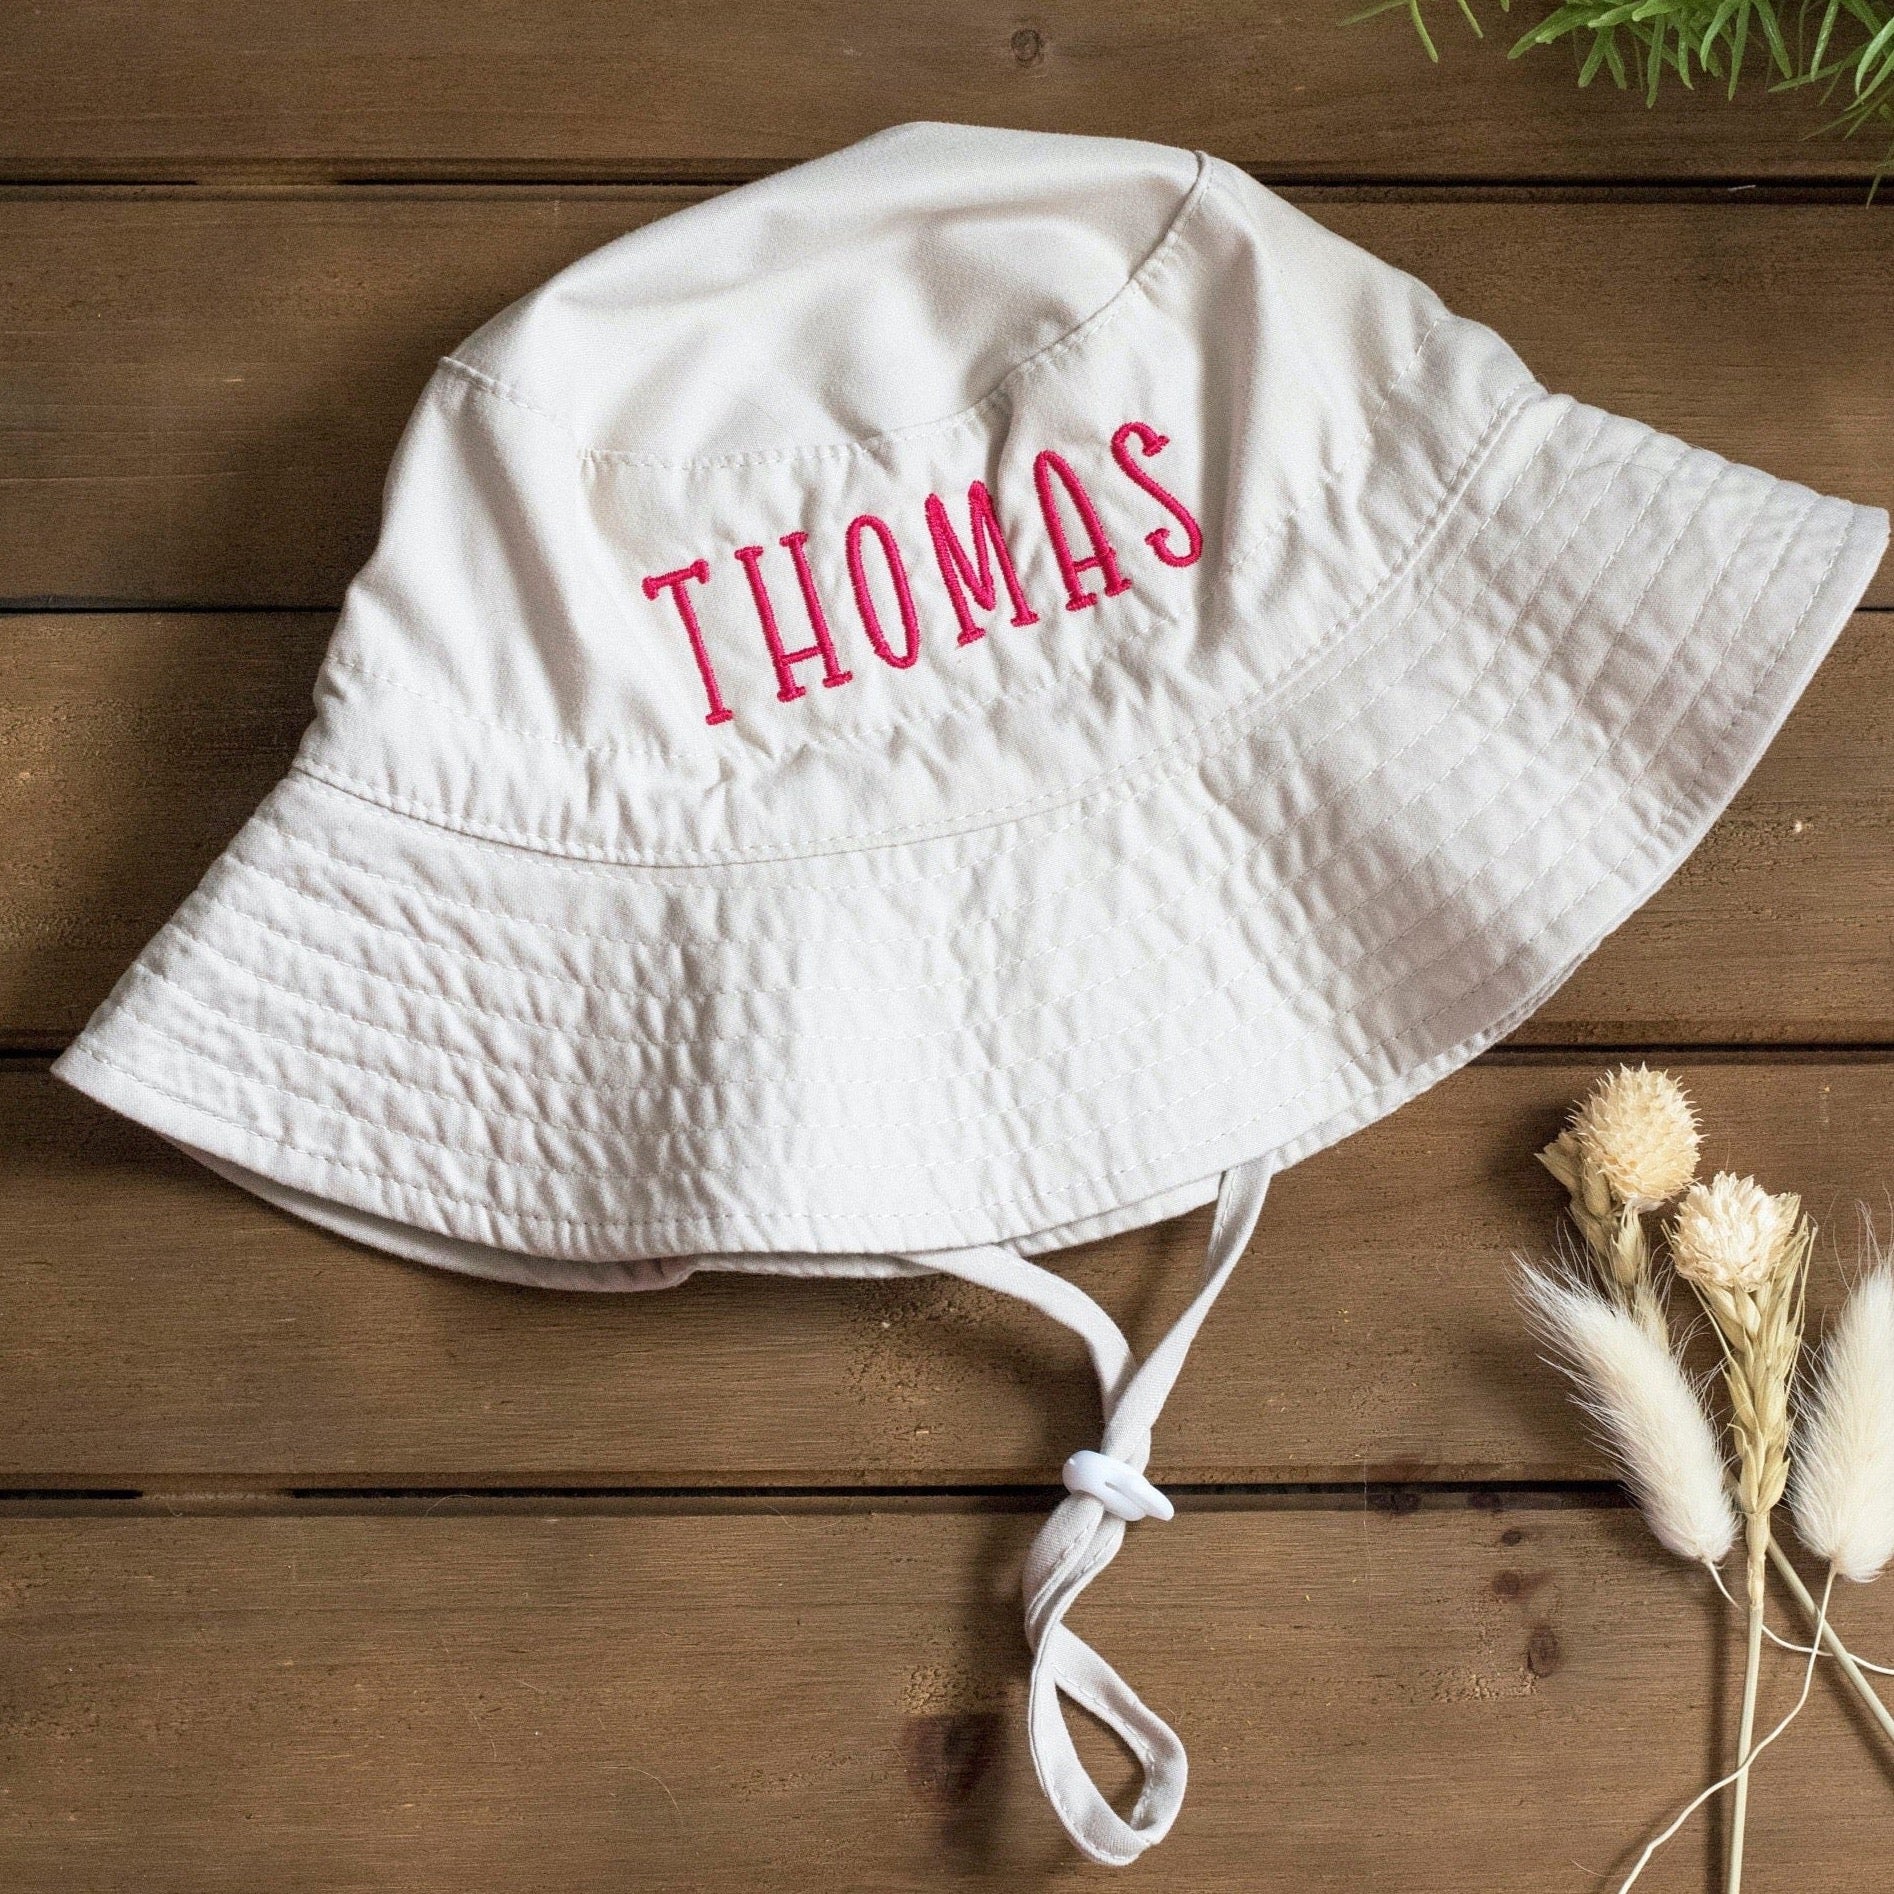 Rosemary Press Co. Personalized Baby Sun Hat | Gender Neutral Custom Embroidered Bucket Hat | for Baby and Toddler 0-12 Months - White / Times New Roman